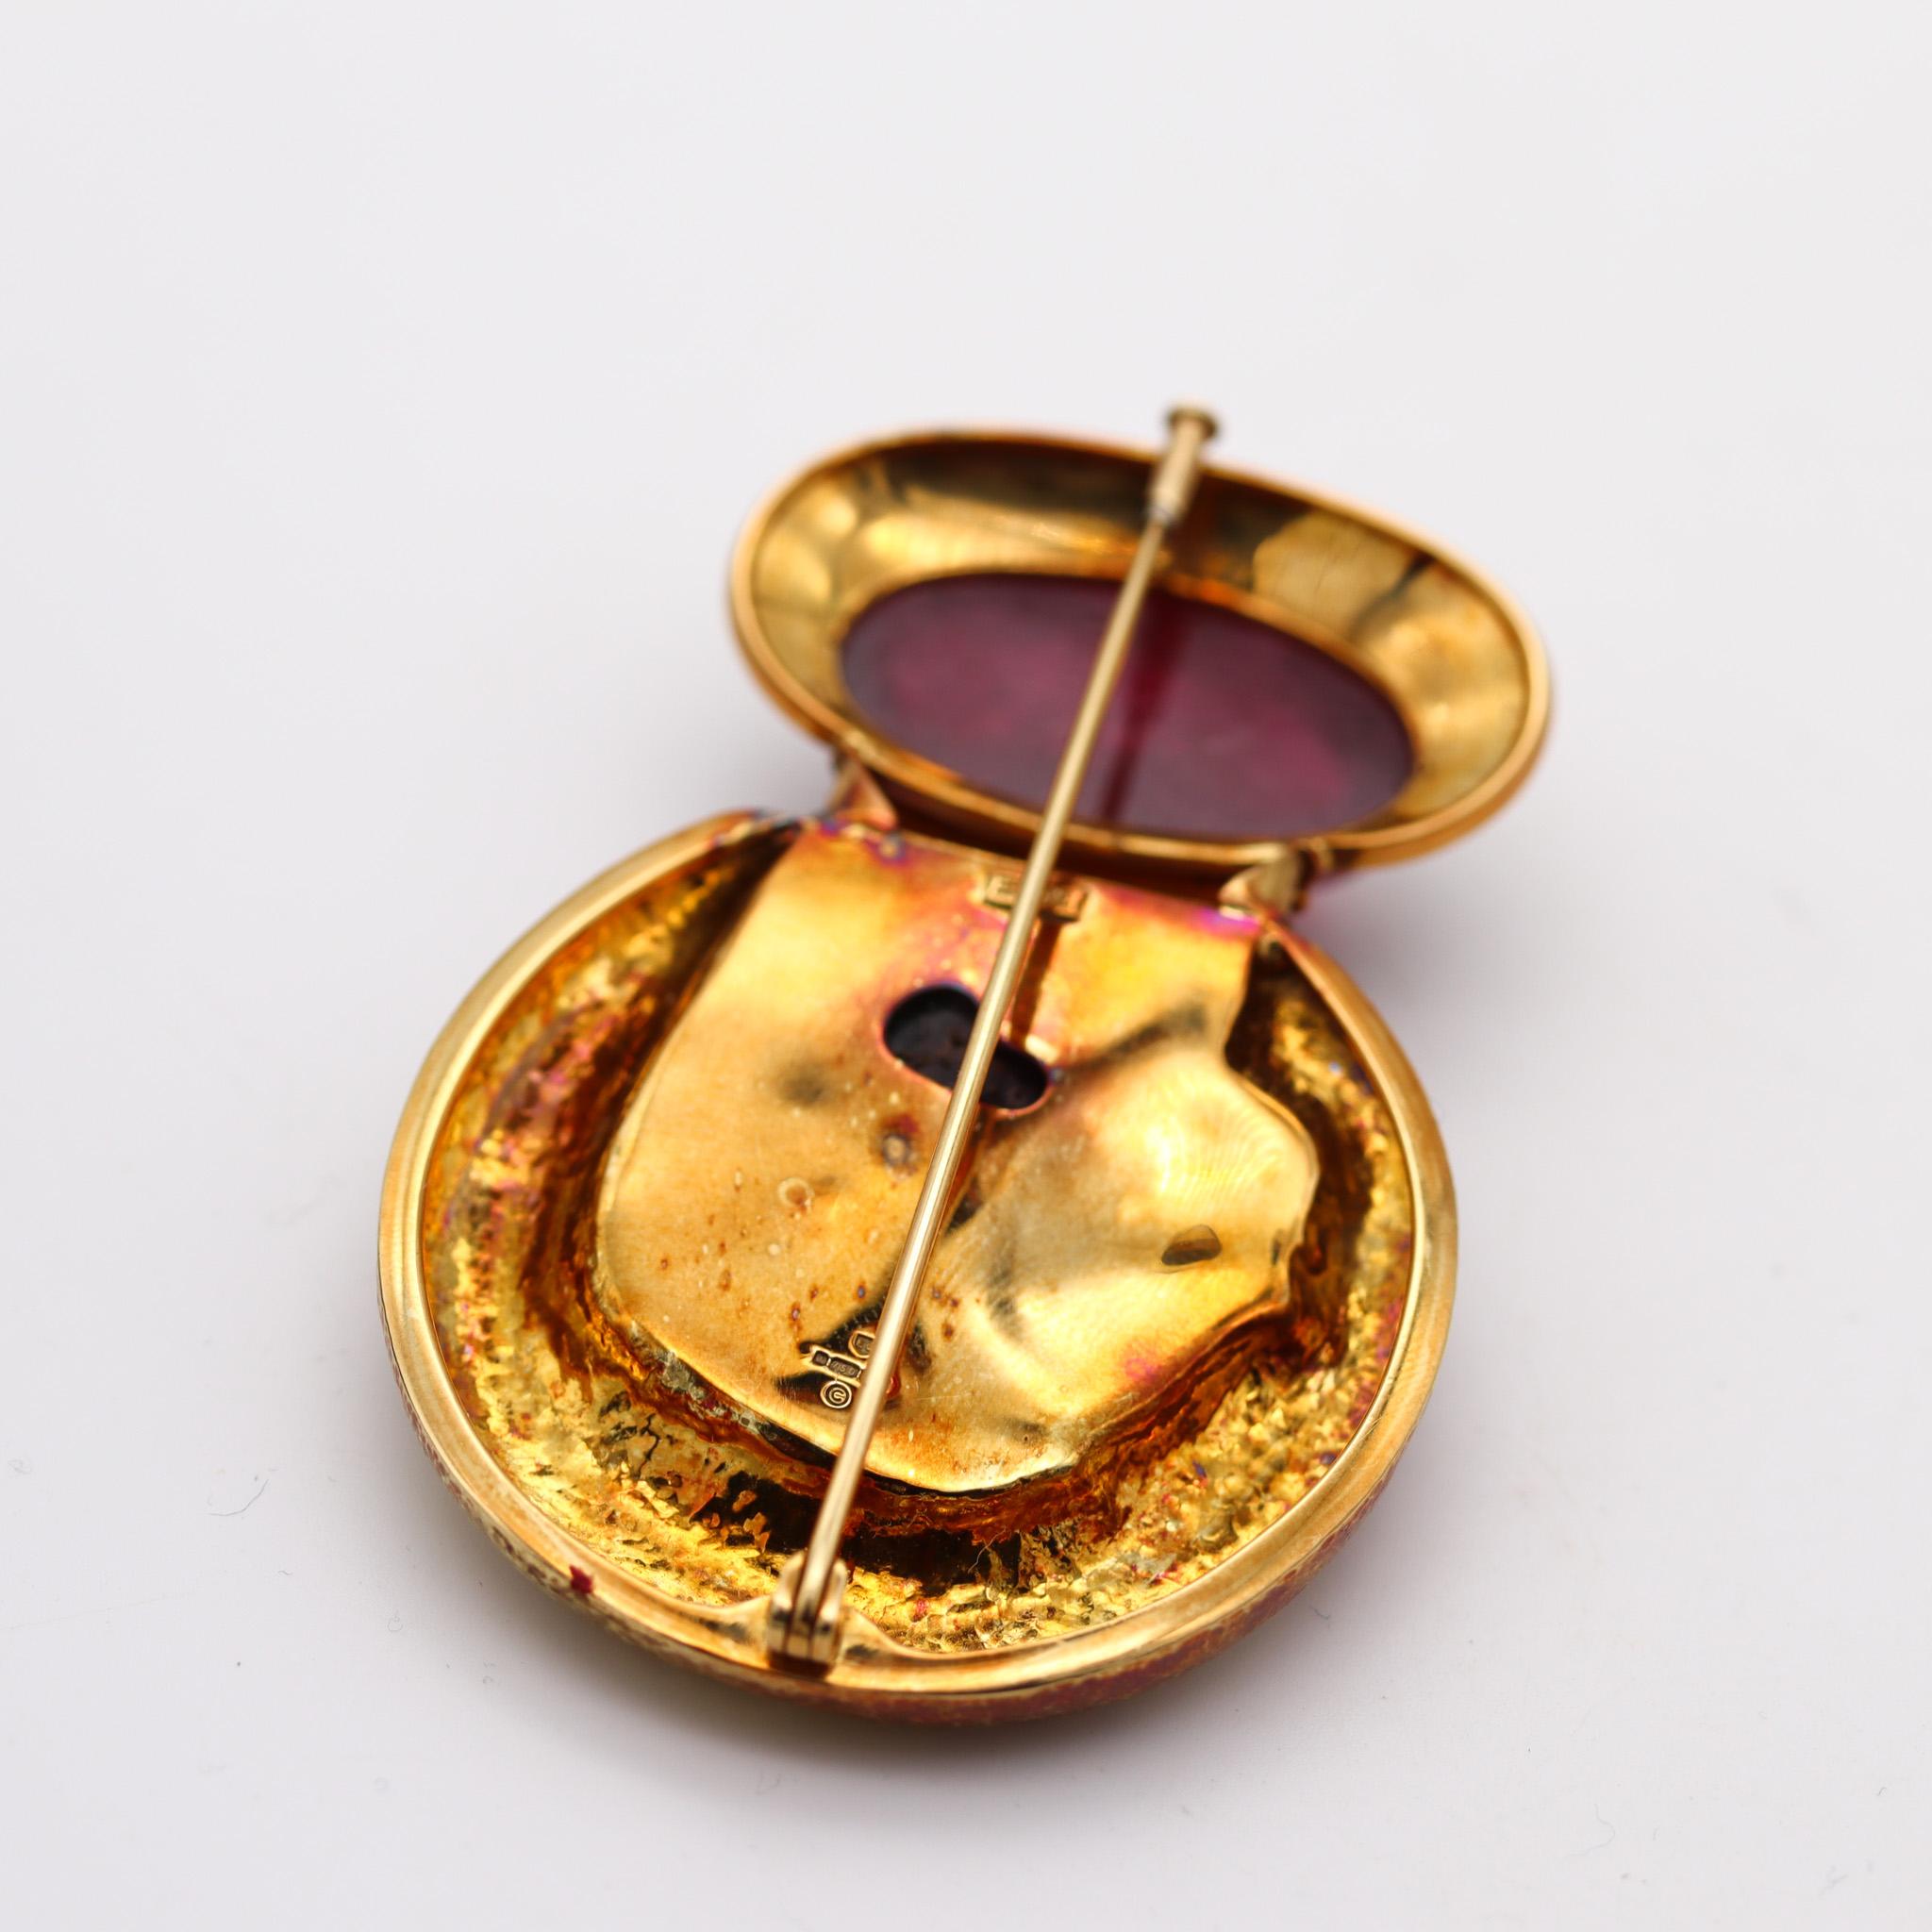 Cabochon Elizabeth Gage 1990 London Enameled Pendant Brooch In 18Kt Gold With Tourmalines For Sale